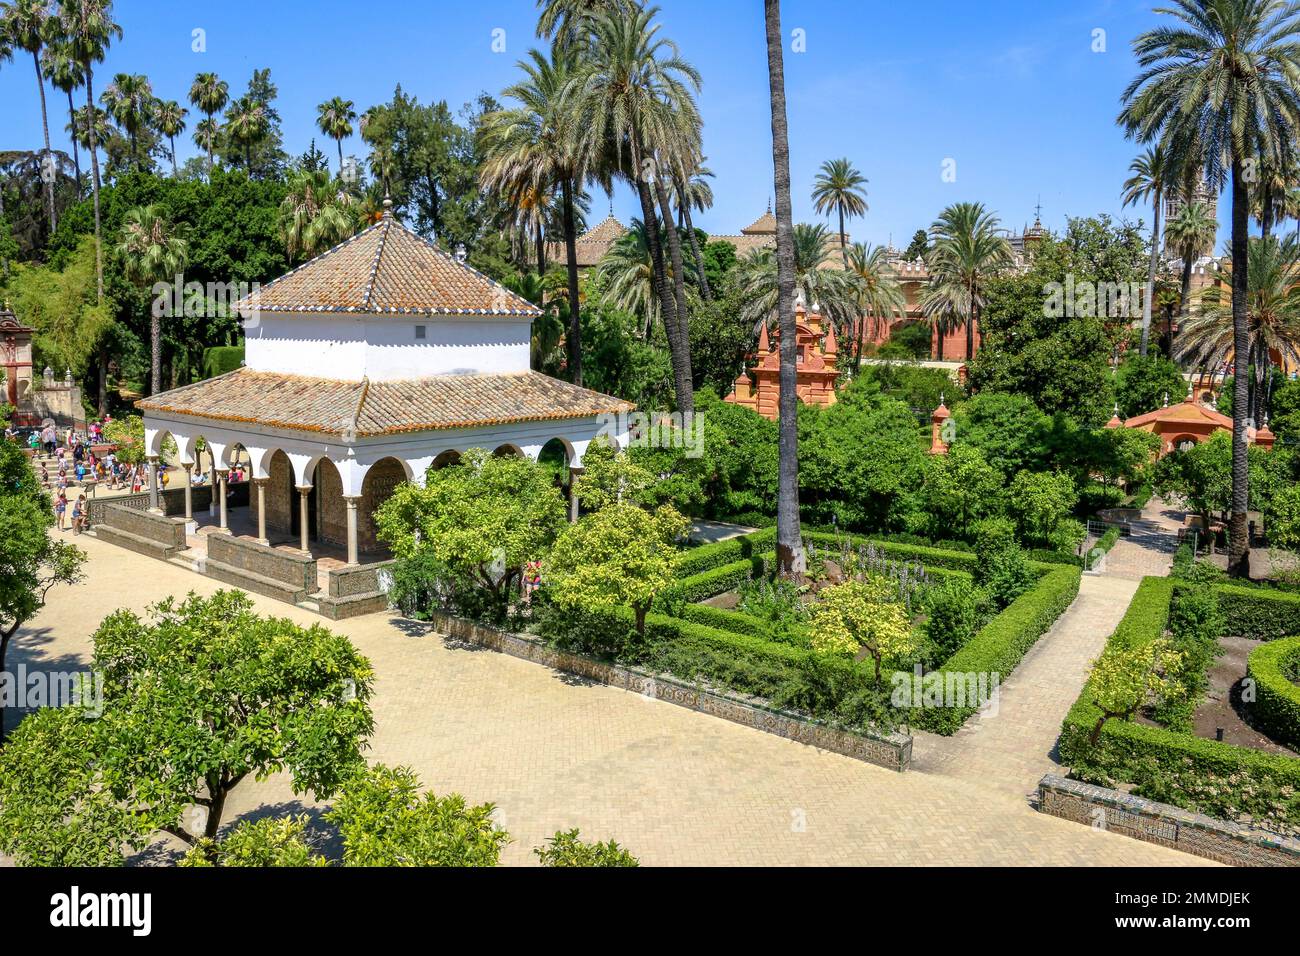 Garden at Alcazar palace in the city of Seville, Spain Stock Photo